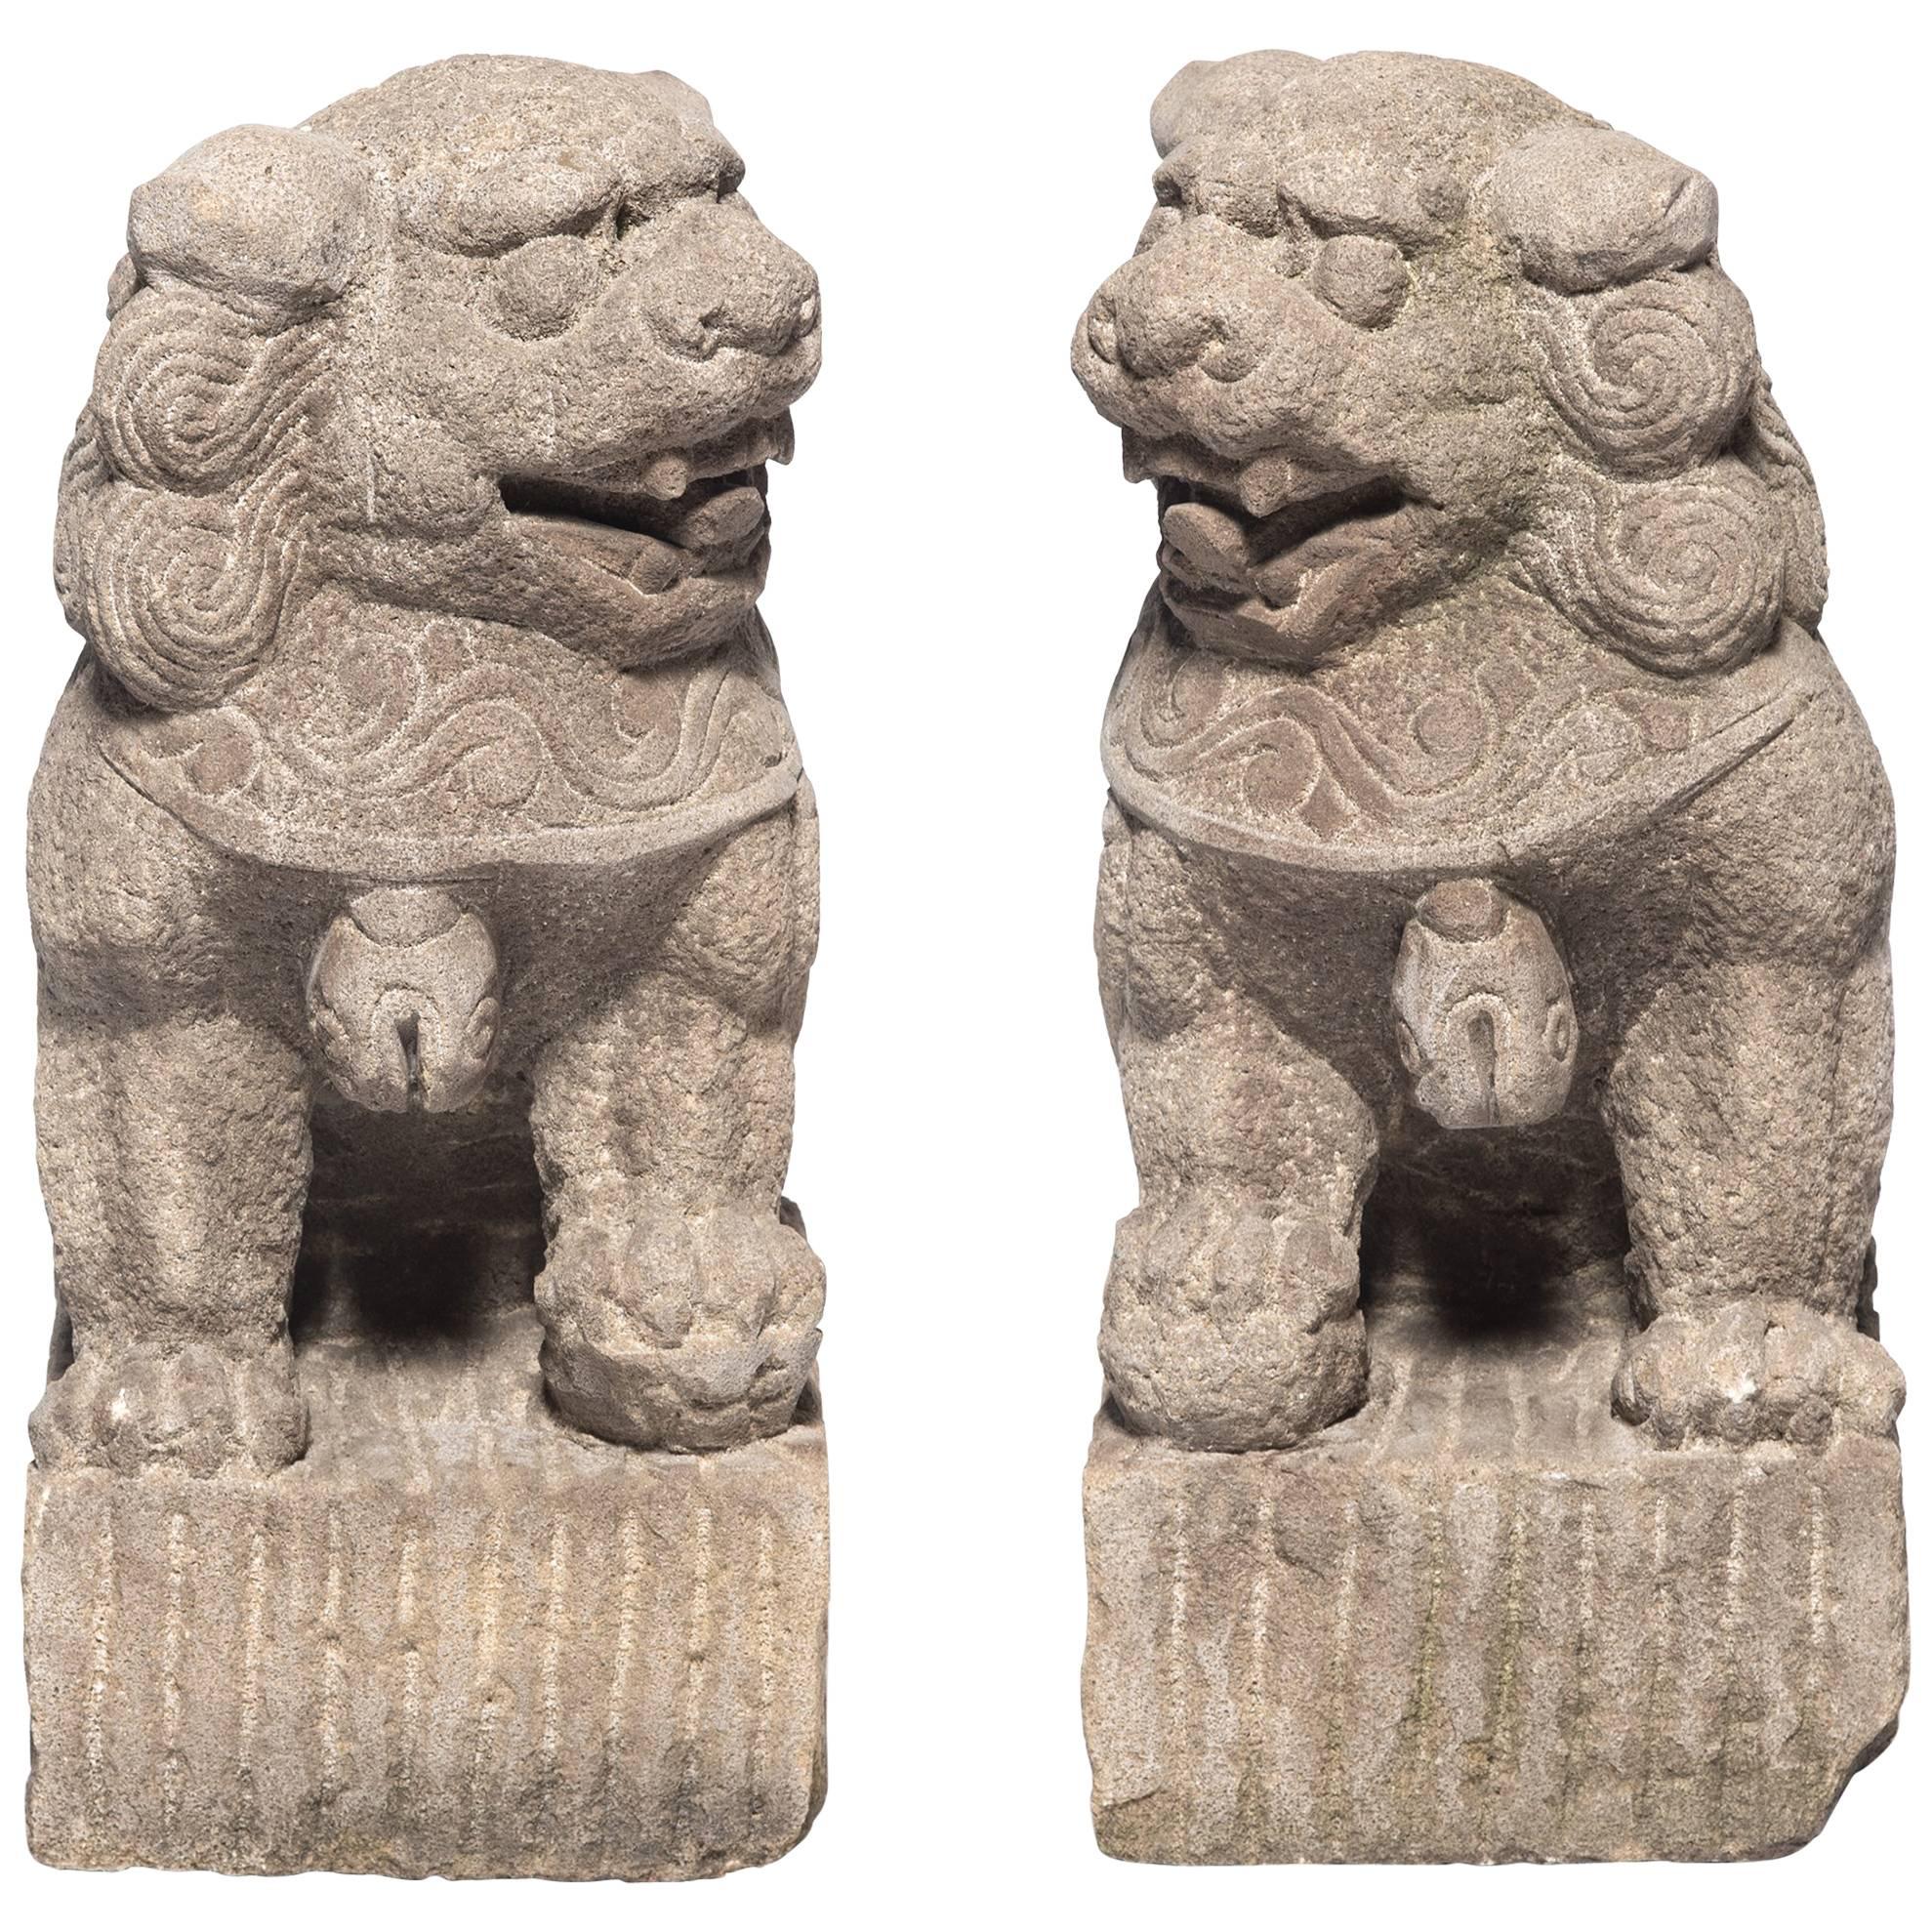 Pair of Chinese Stone Fu Dog Protectors, c. 1850